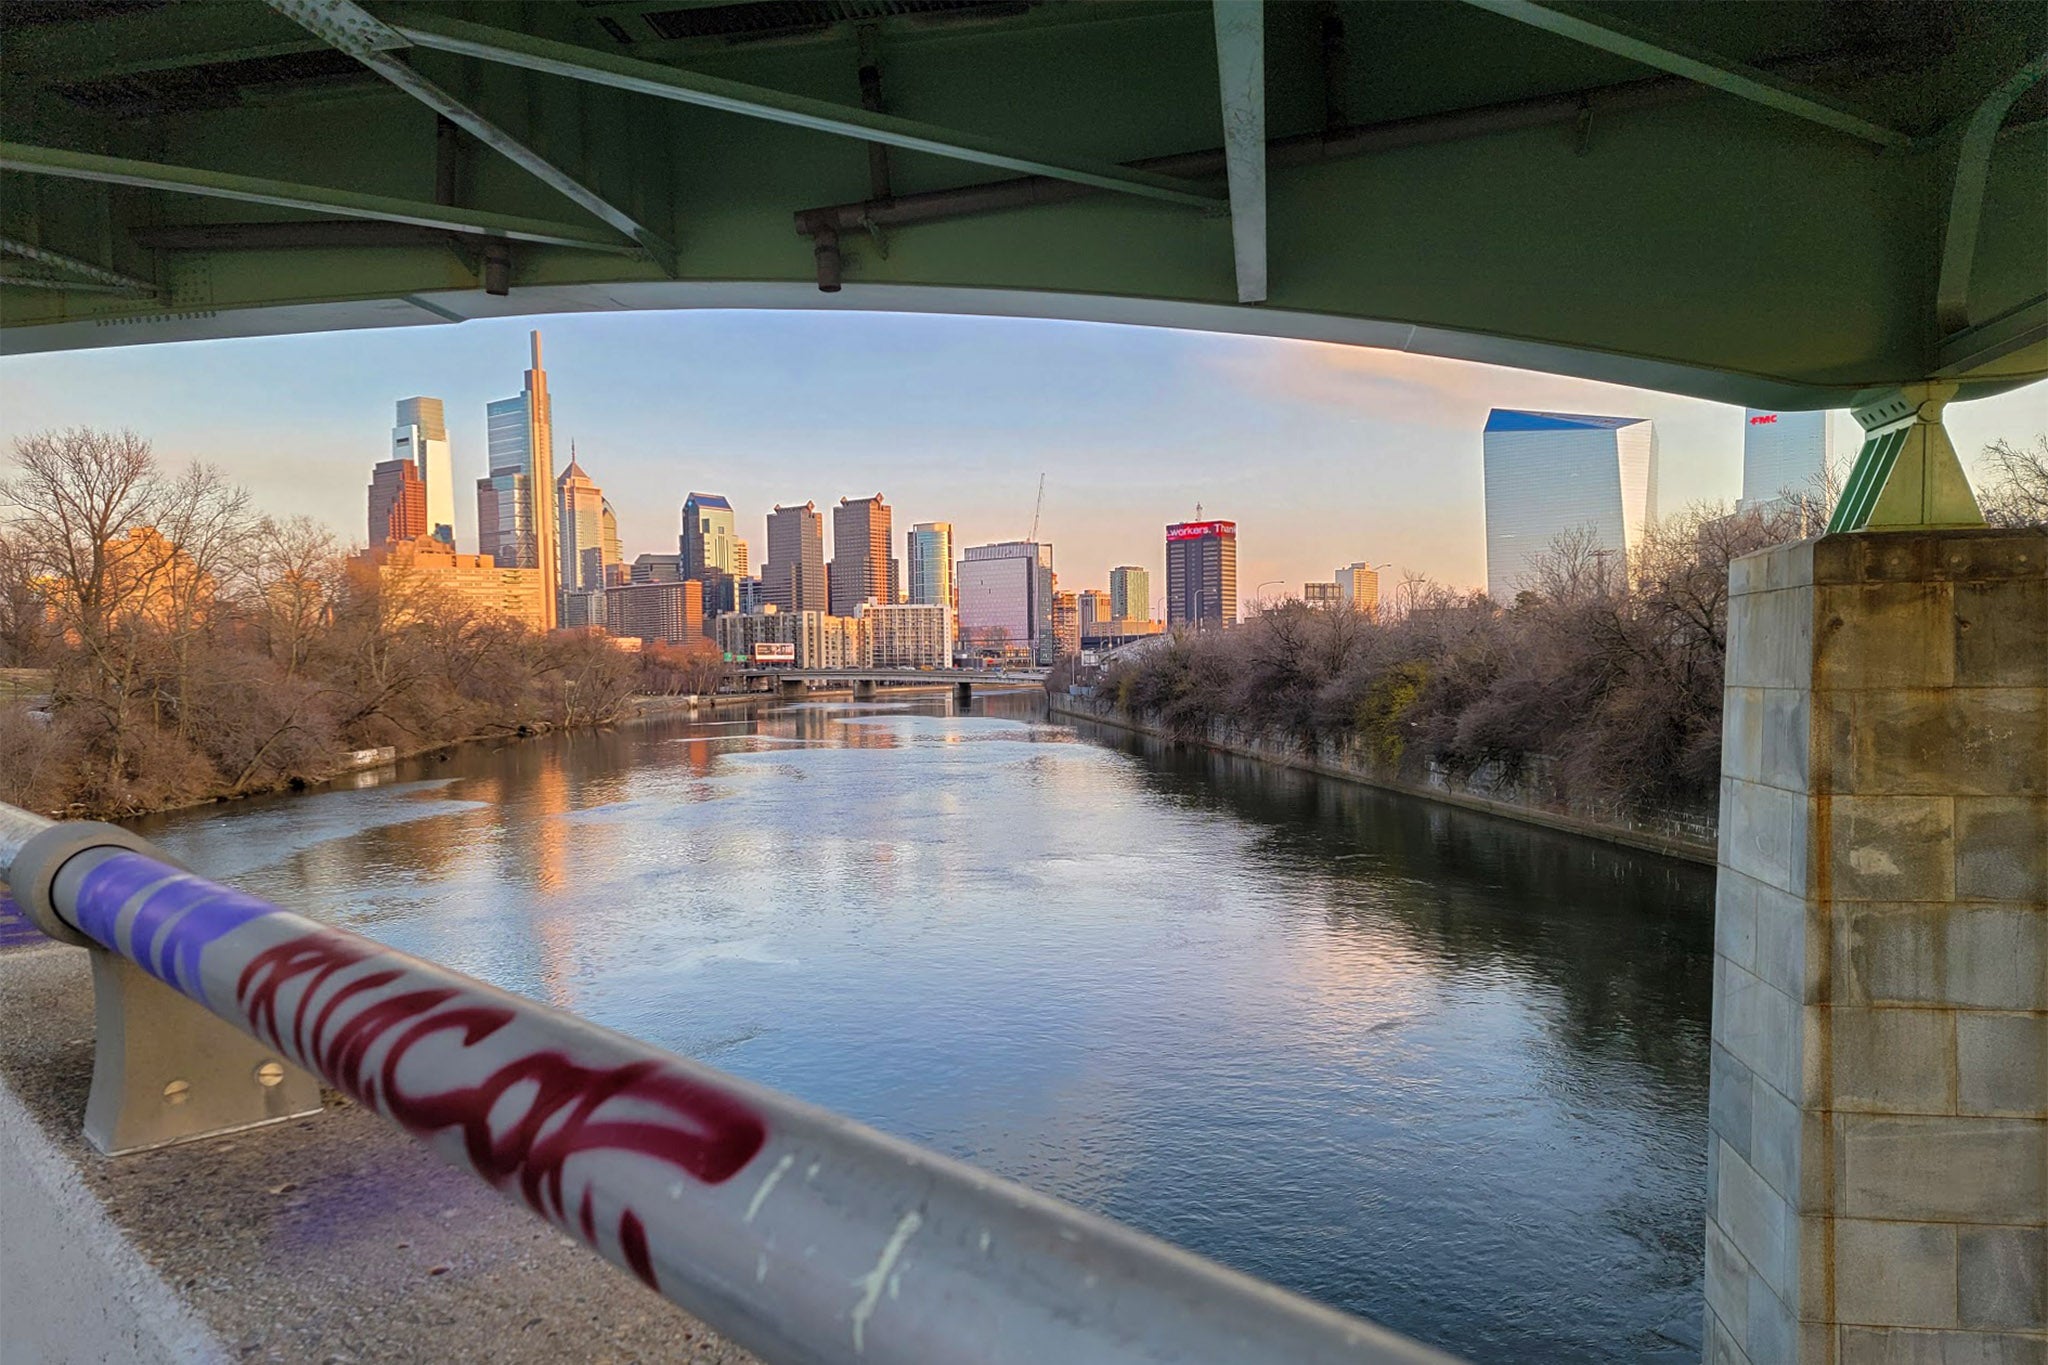 The Philly skyline as seen from a bridge